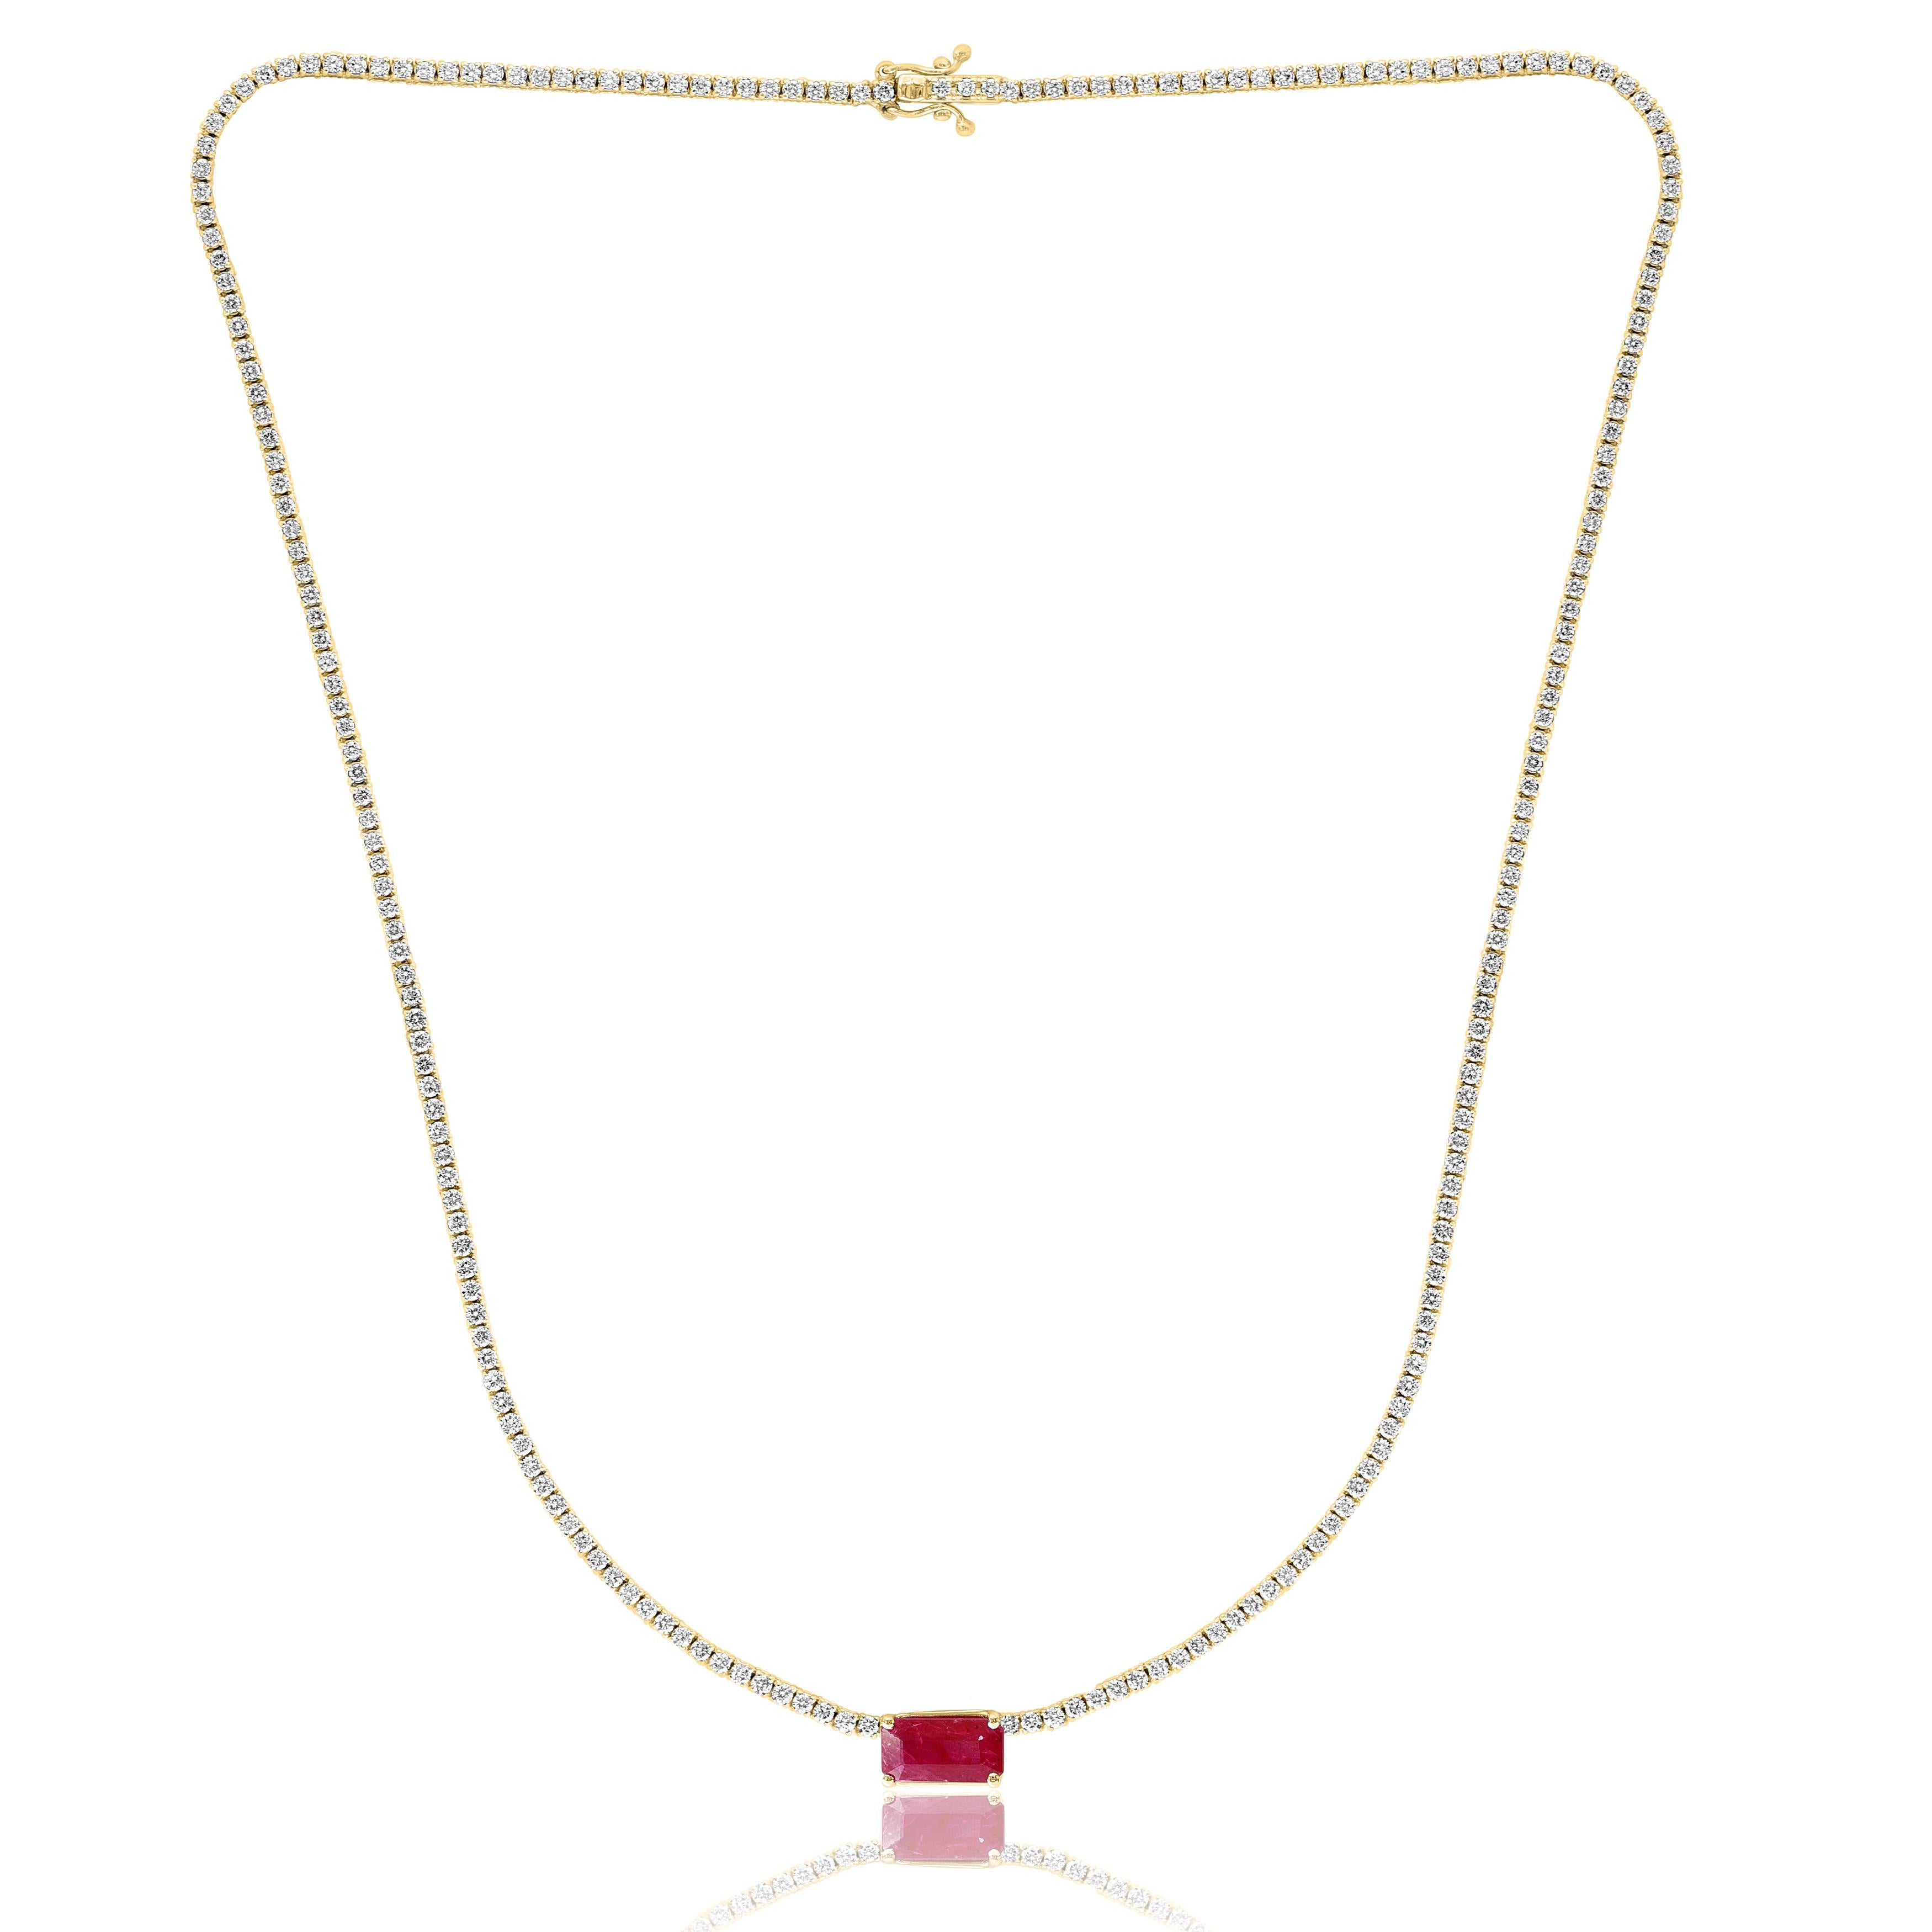 1.49 Carat Emerald Cut Ruby and Diamond Tennis Necklace in 14K Yellow Gold